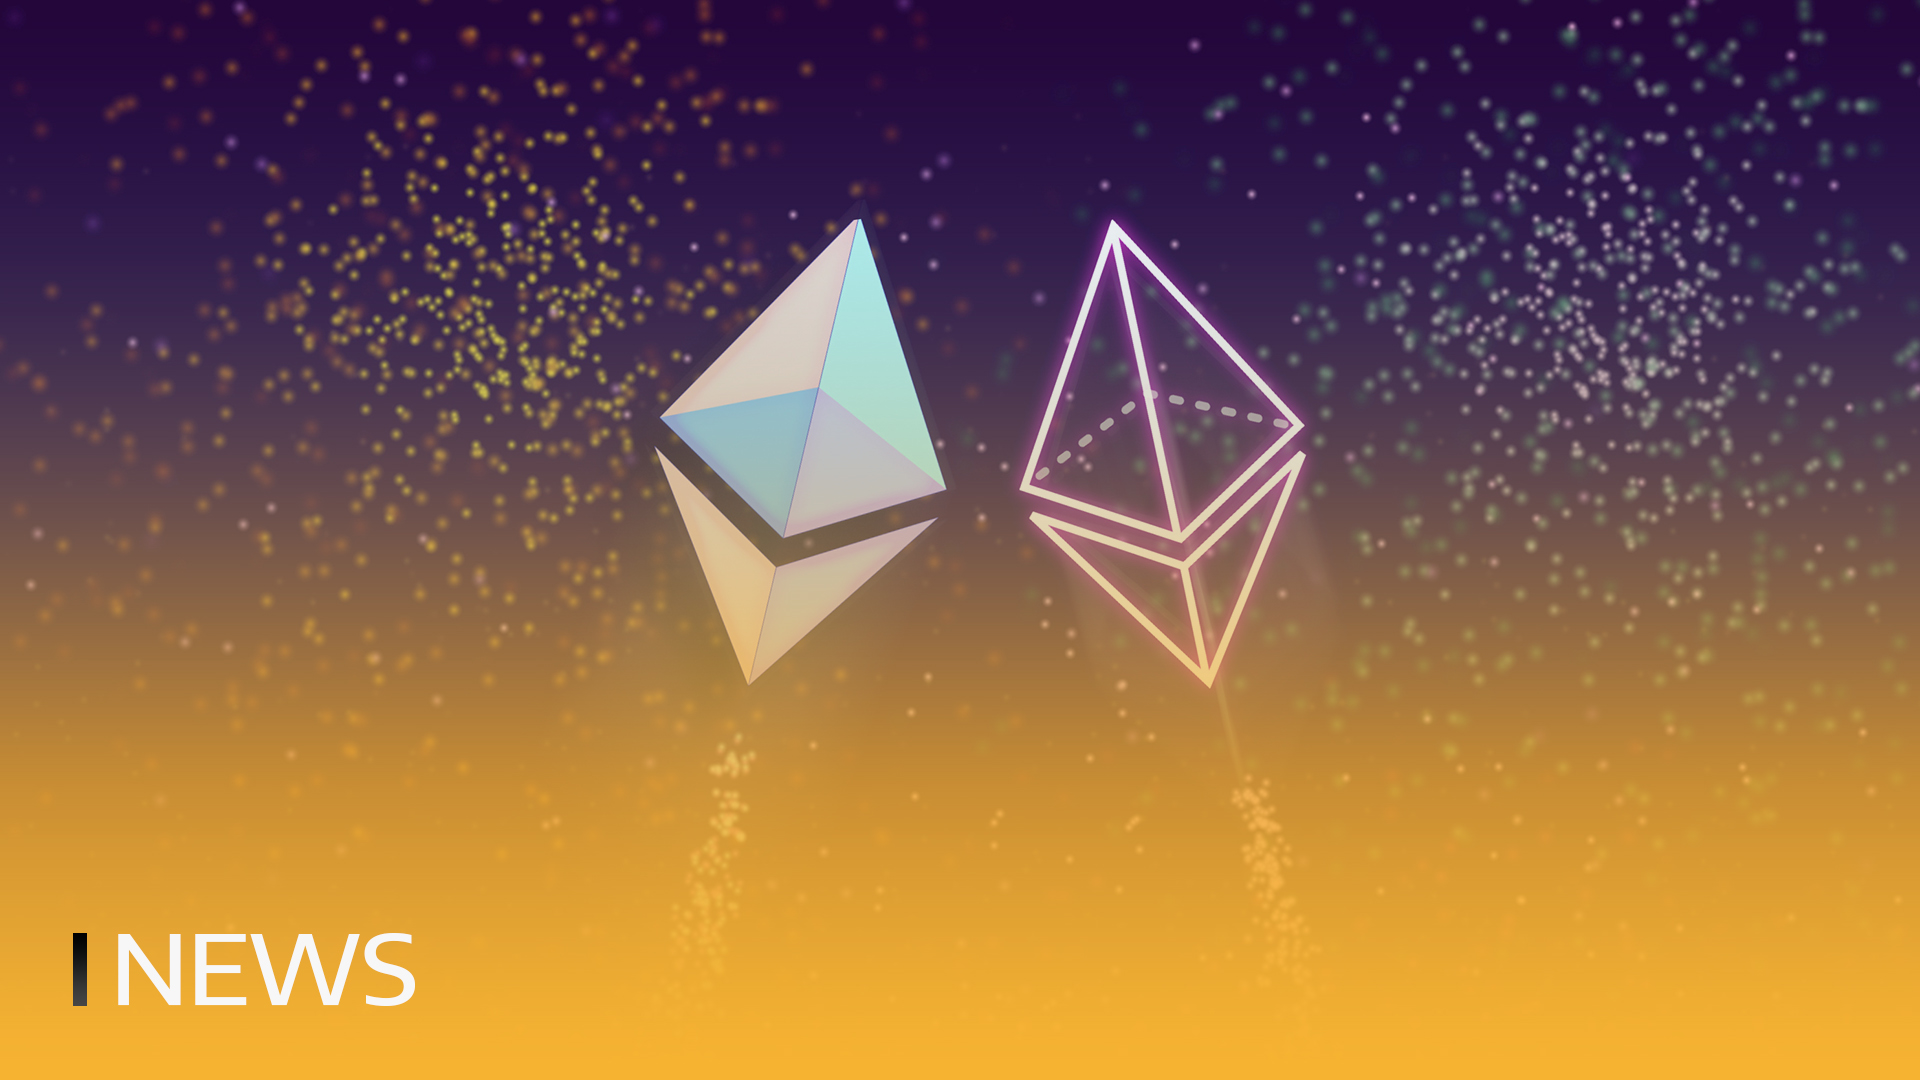 Ethereum Ecosystem Users Grew 9 Times Since 2020